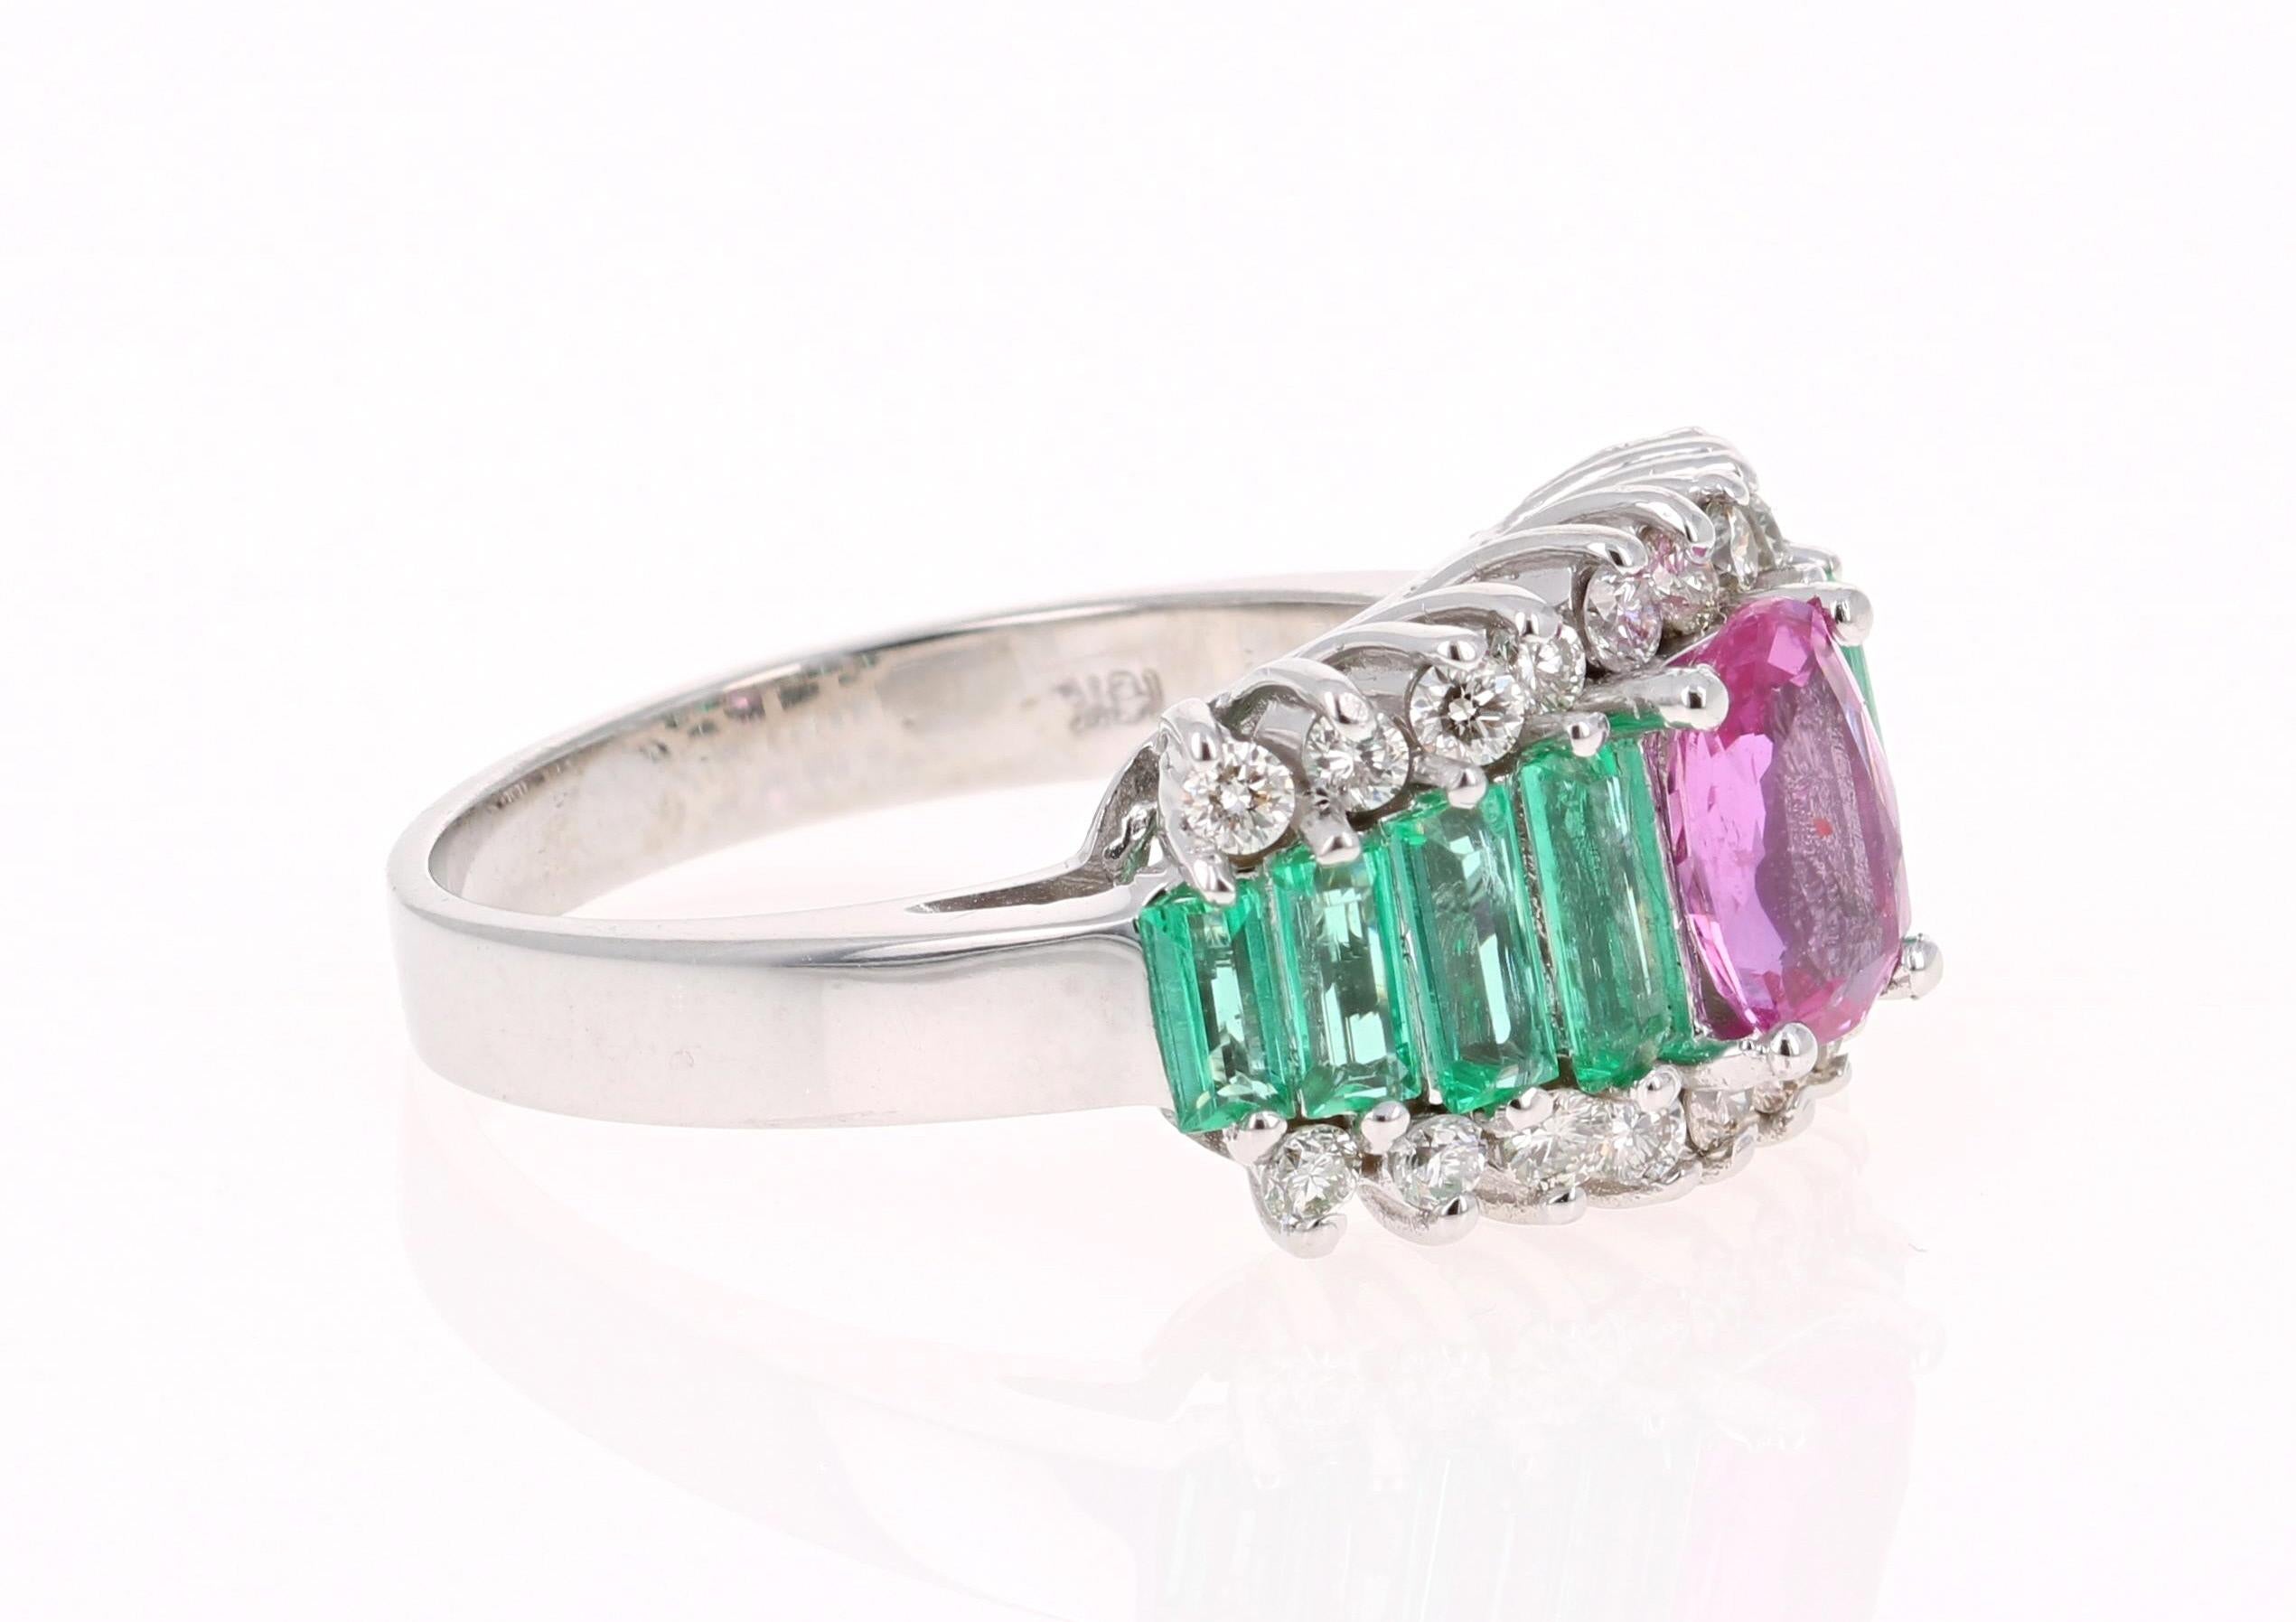 Beautiful and Unique Pink Sapphire, Emerald, & Diamond Ring!! 

This ring has an Oval Cut Pink Sapphire that weighs 1.02 Carats. The Pink Sapphire is a NO HEAT/GIA Certified stone. 
The GIA Certificate # is: 2191781541.

The ring is embellished with